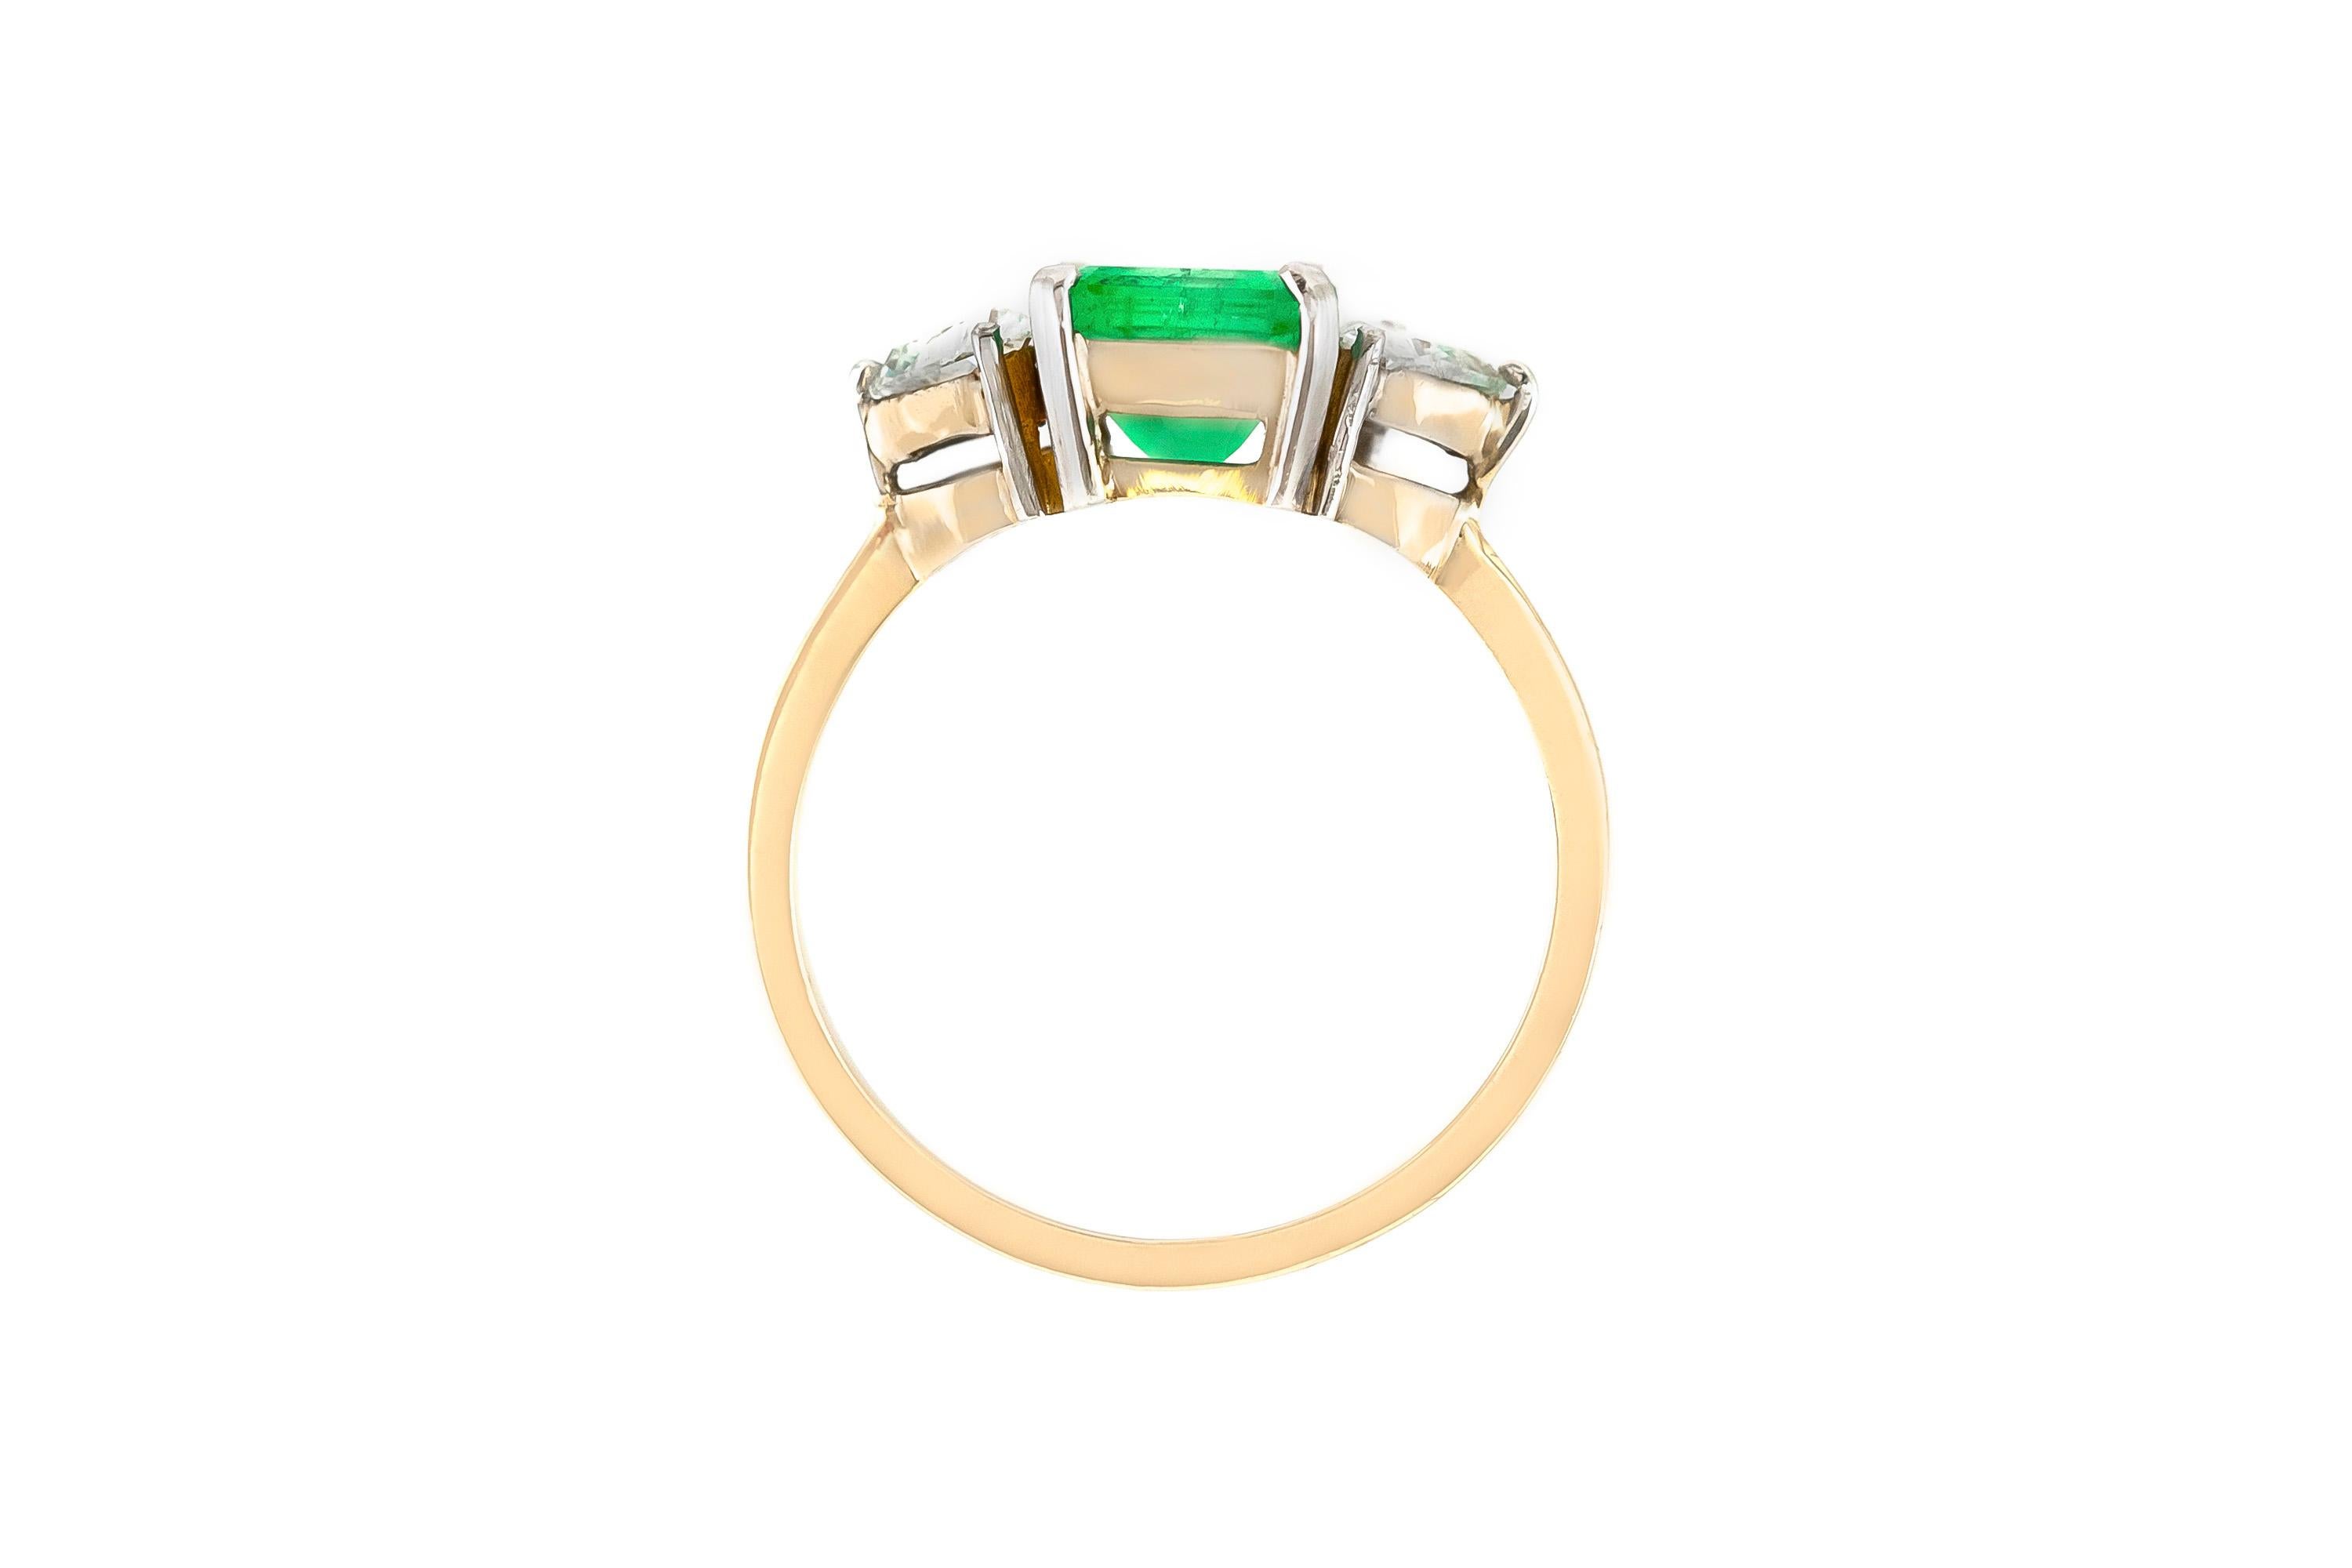 The ring is finely crafted in 18k yellow gold with two heart shape diamonds weighing approximately total of 0.70 carat and center emerald cut emerald stone weighing approximately total of 3.00 carat.
Circa 1960.